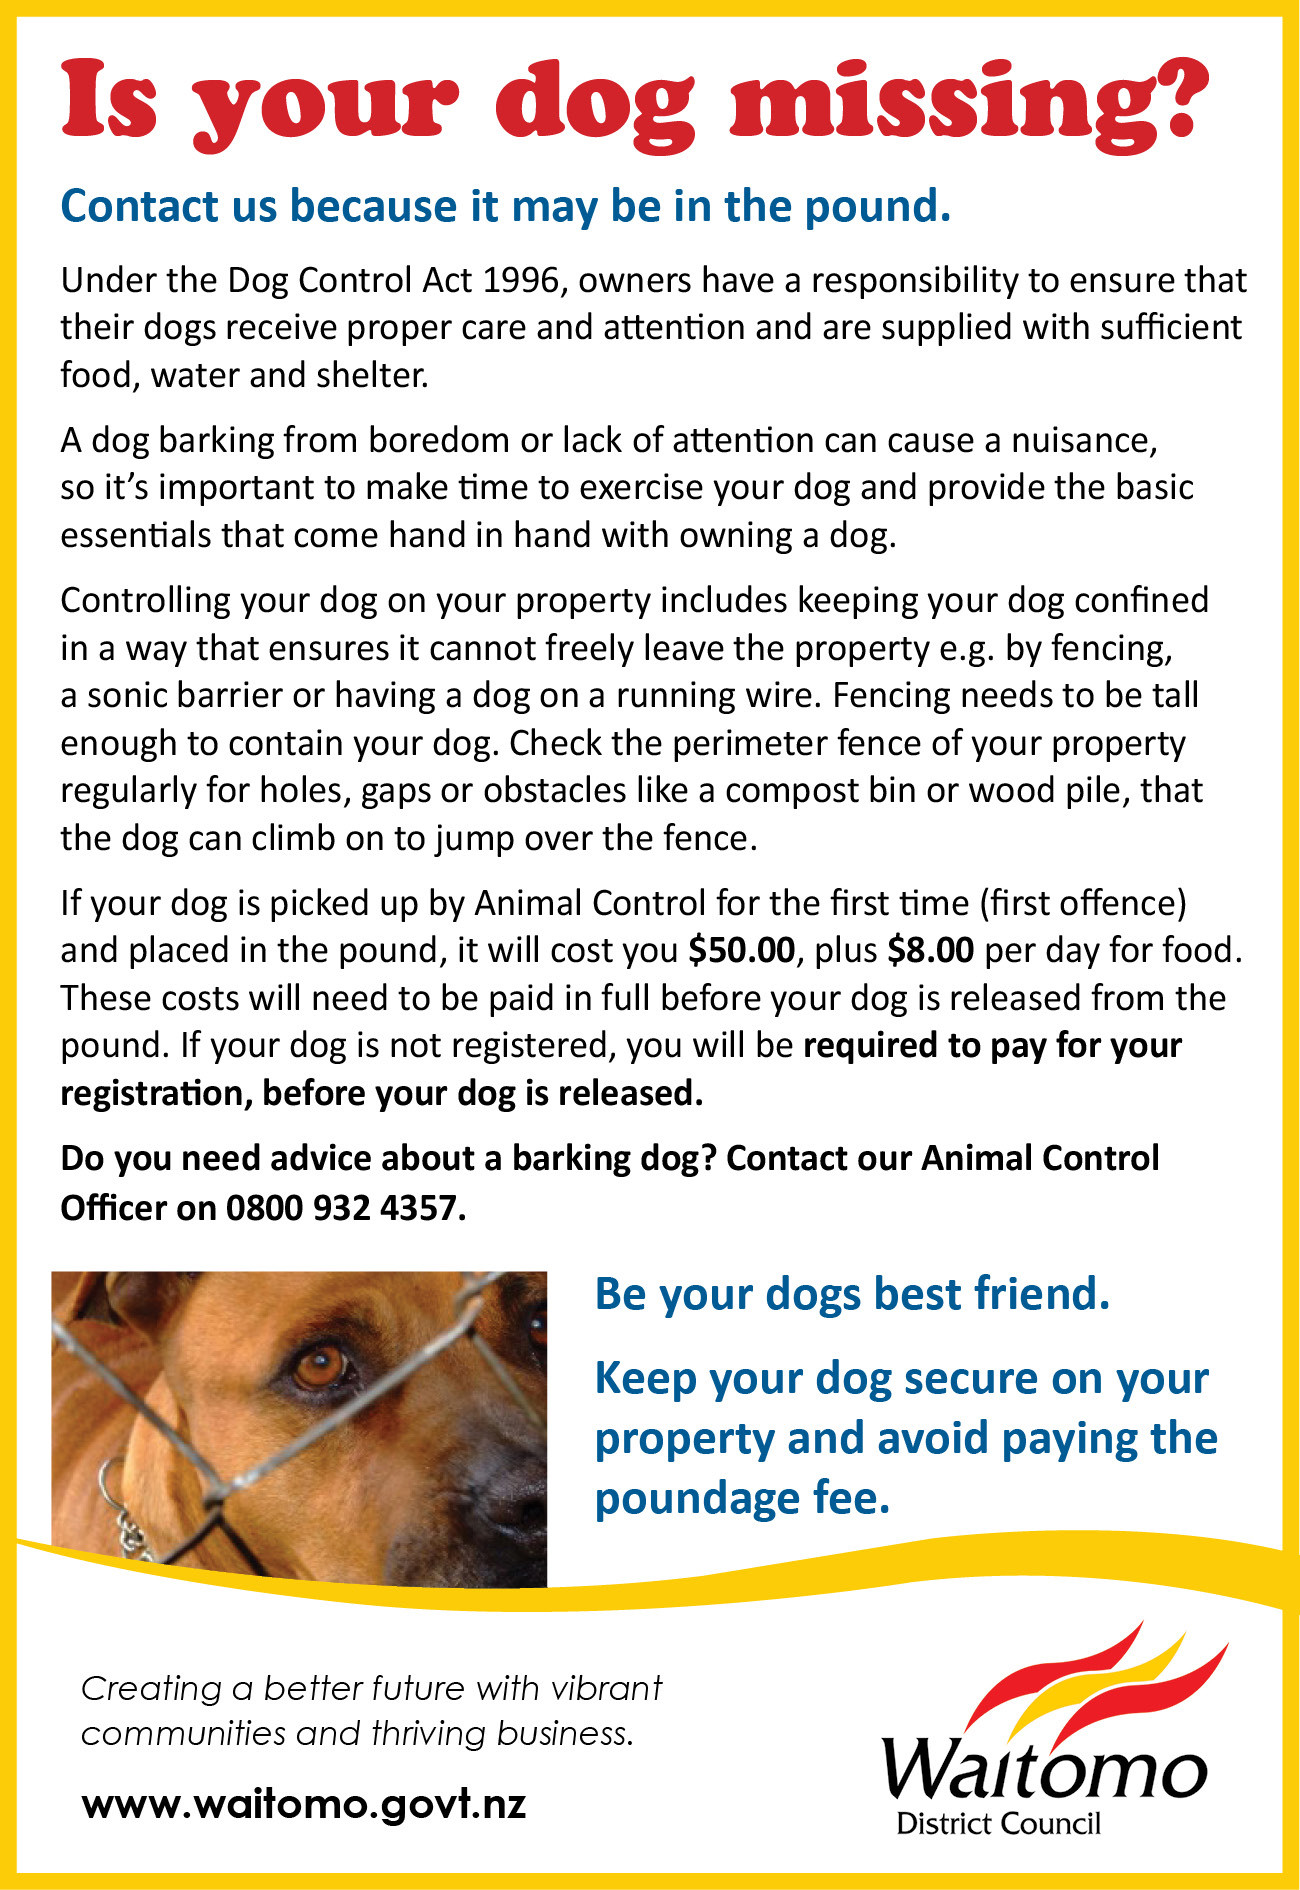 Is your dog missing? Contact Waitomo District Animal Control.